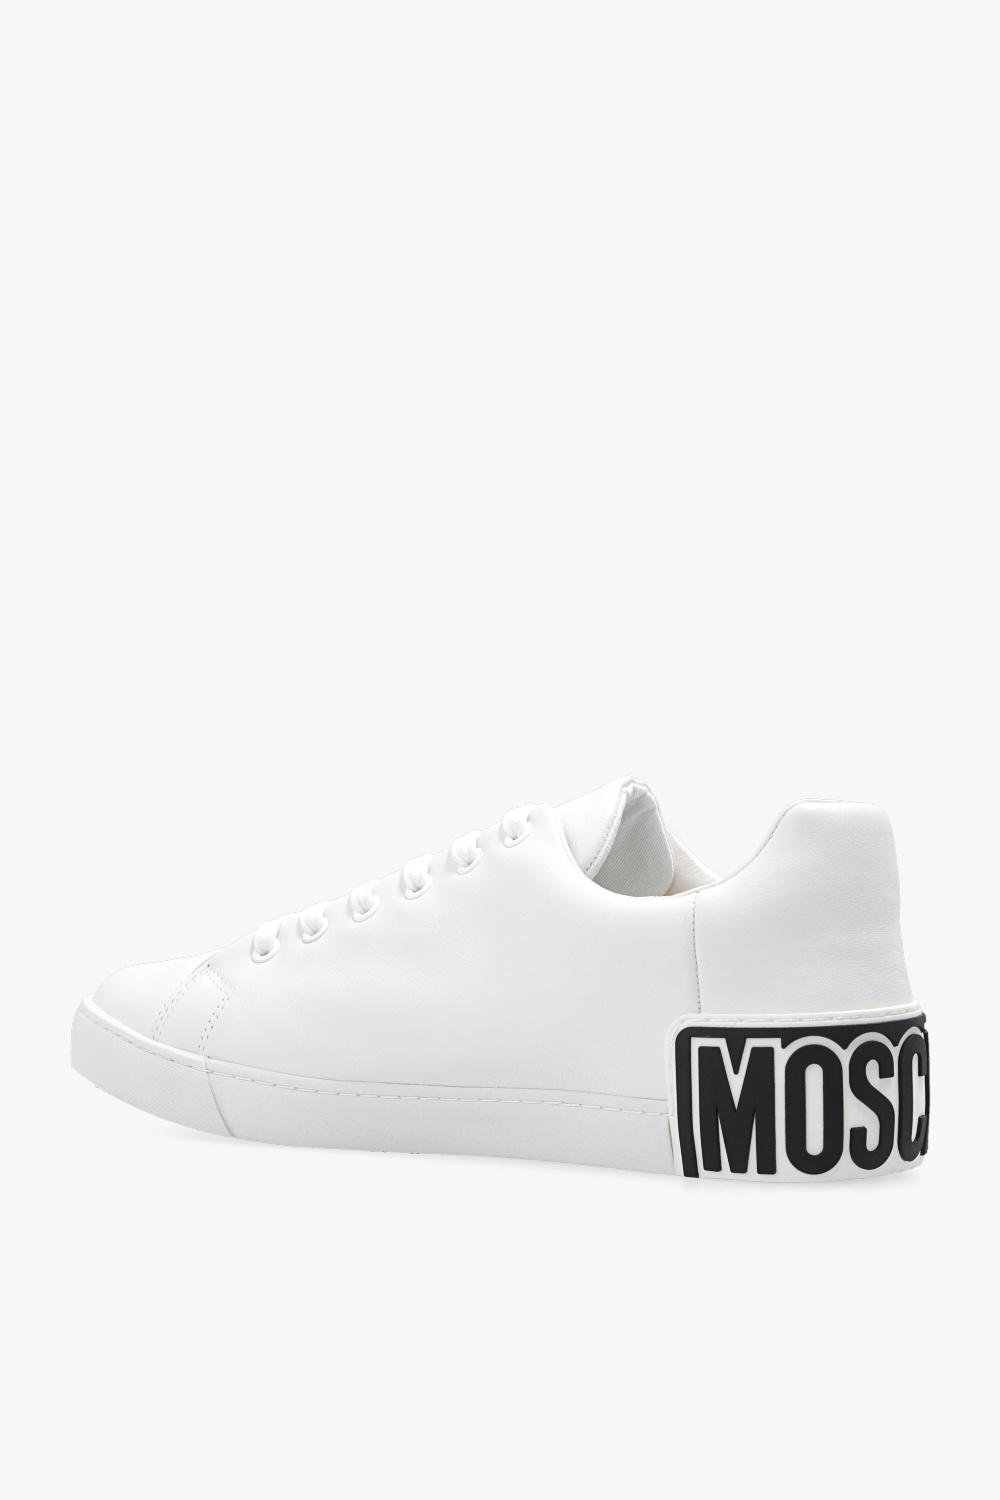 Moschino best sneakers at London Fashion Week SS20